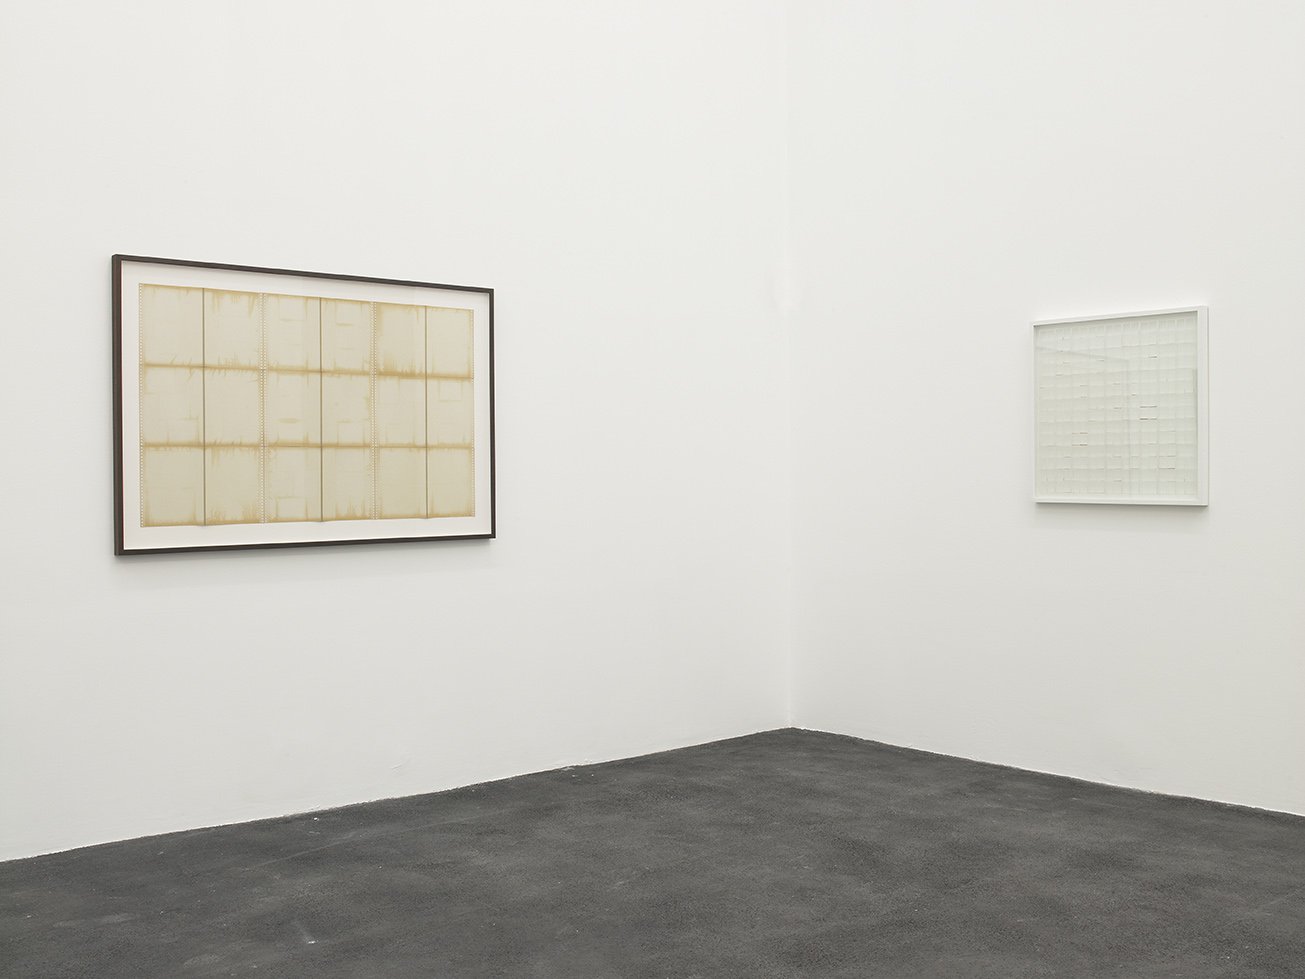 Eftihis Patsourakis, Sand 3, framed found album pages, 102.5 x 156 cm (40 3/8 x 61 3/8 in), 2009